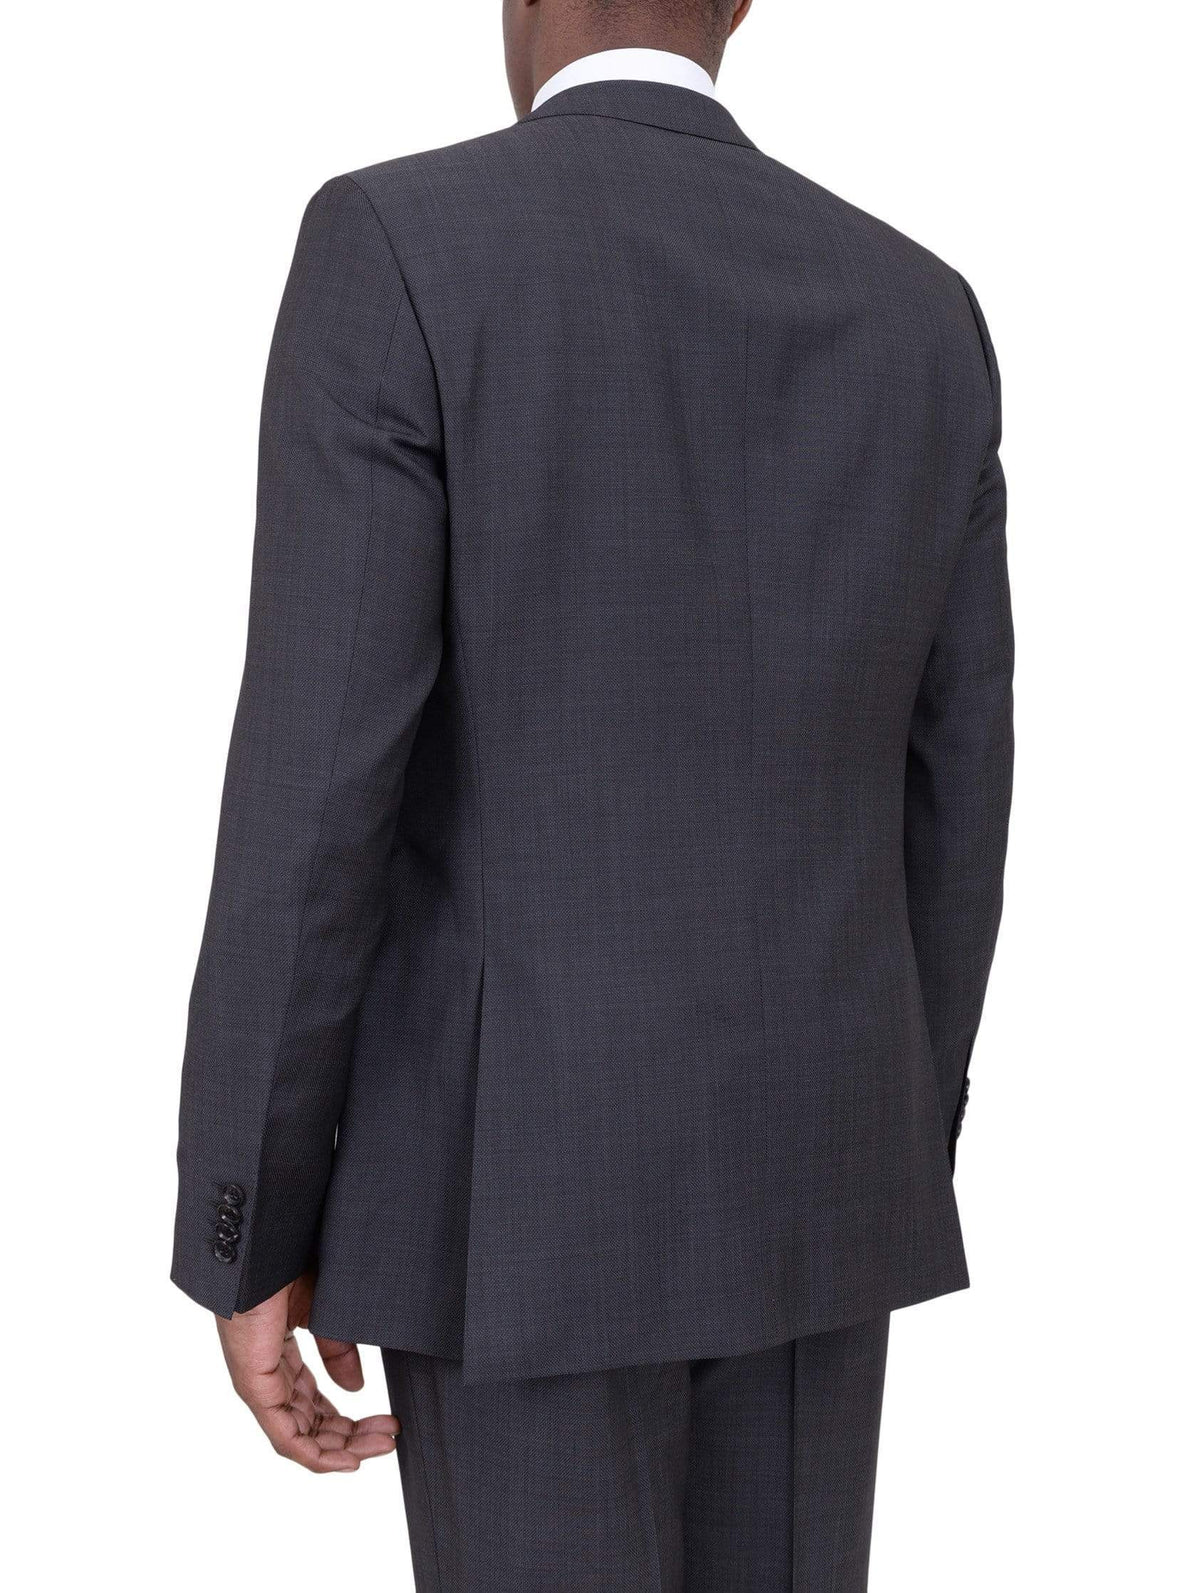 HUGO BOSS TWO PIECE SUITS Hugo Boss The Fordham/central Charcoal Gray Pindot Wool Suit With Peak Lapels